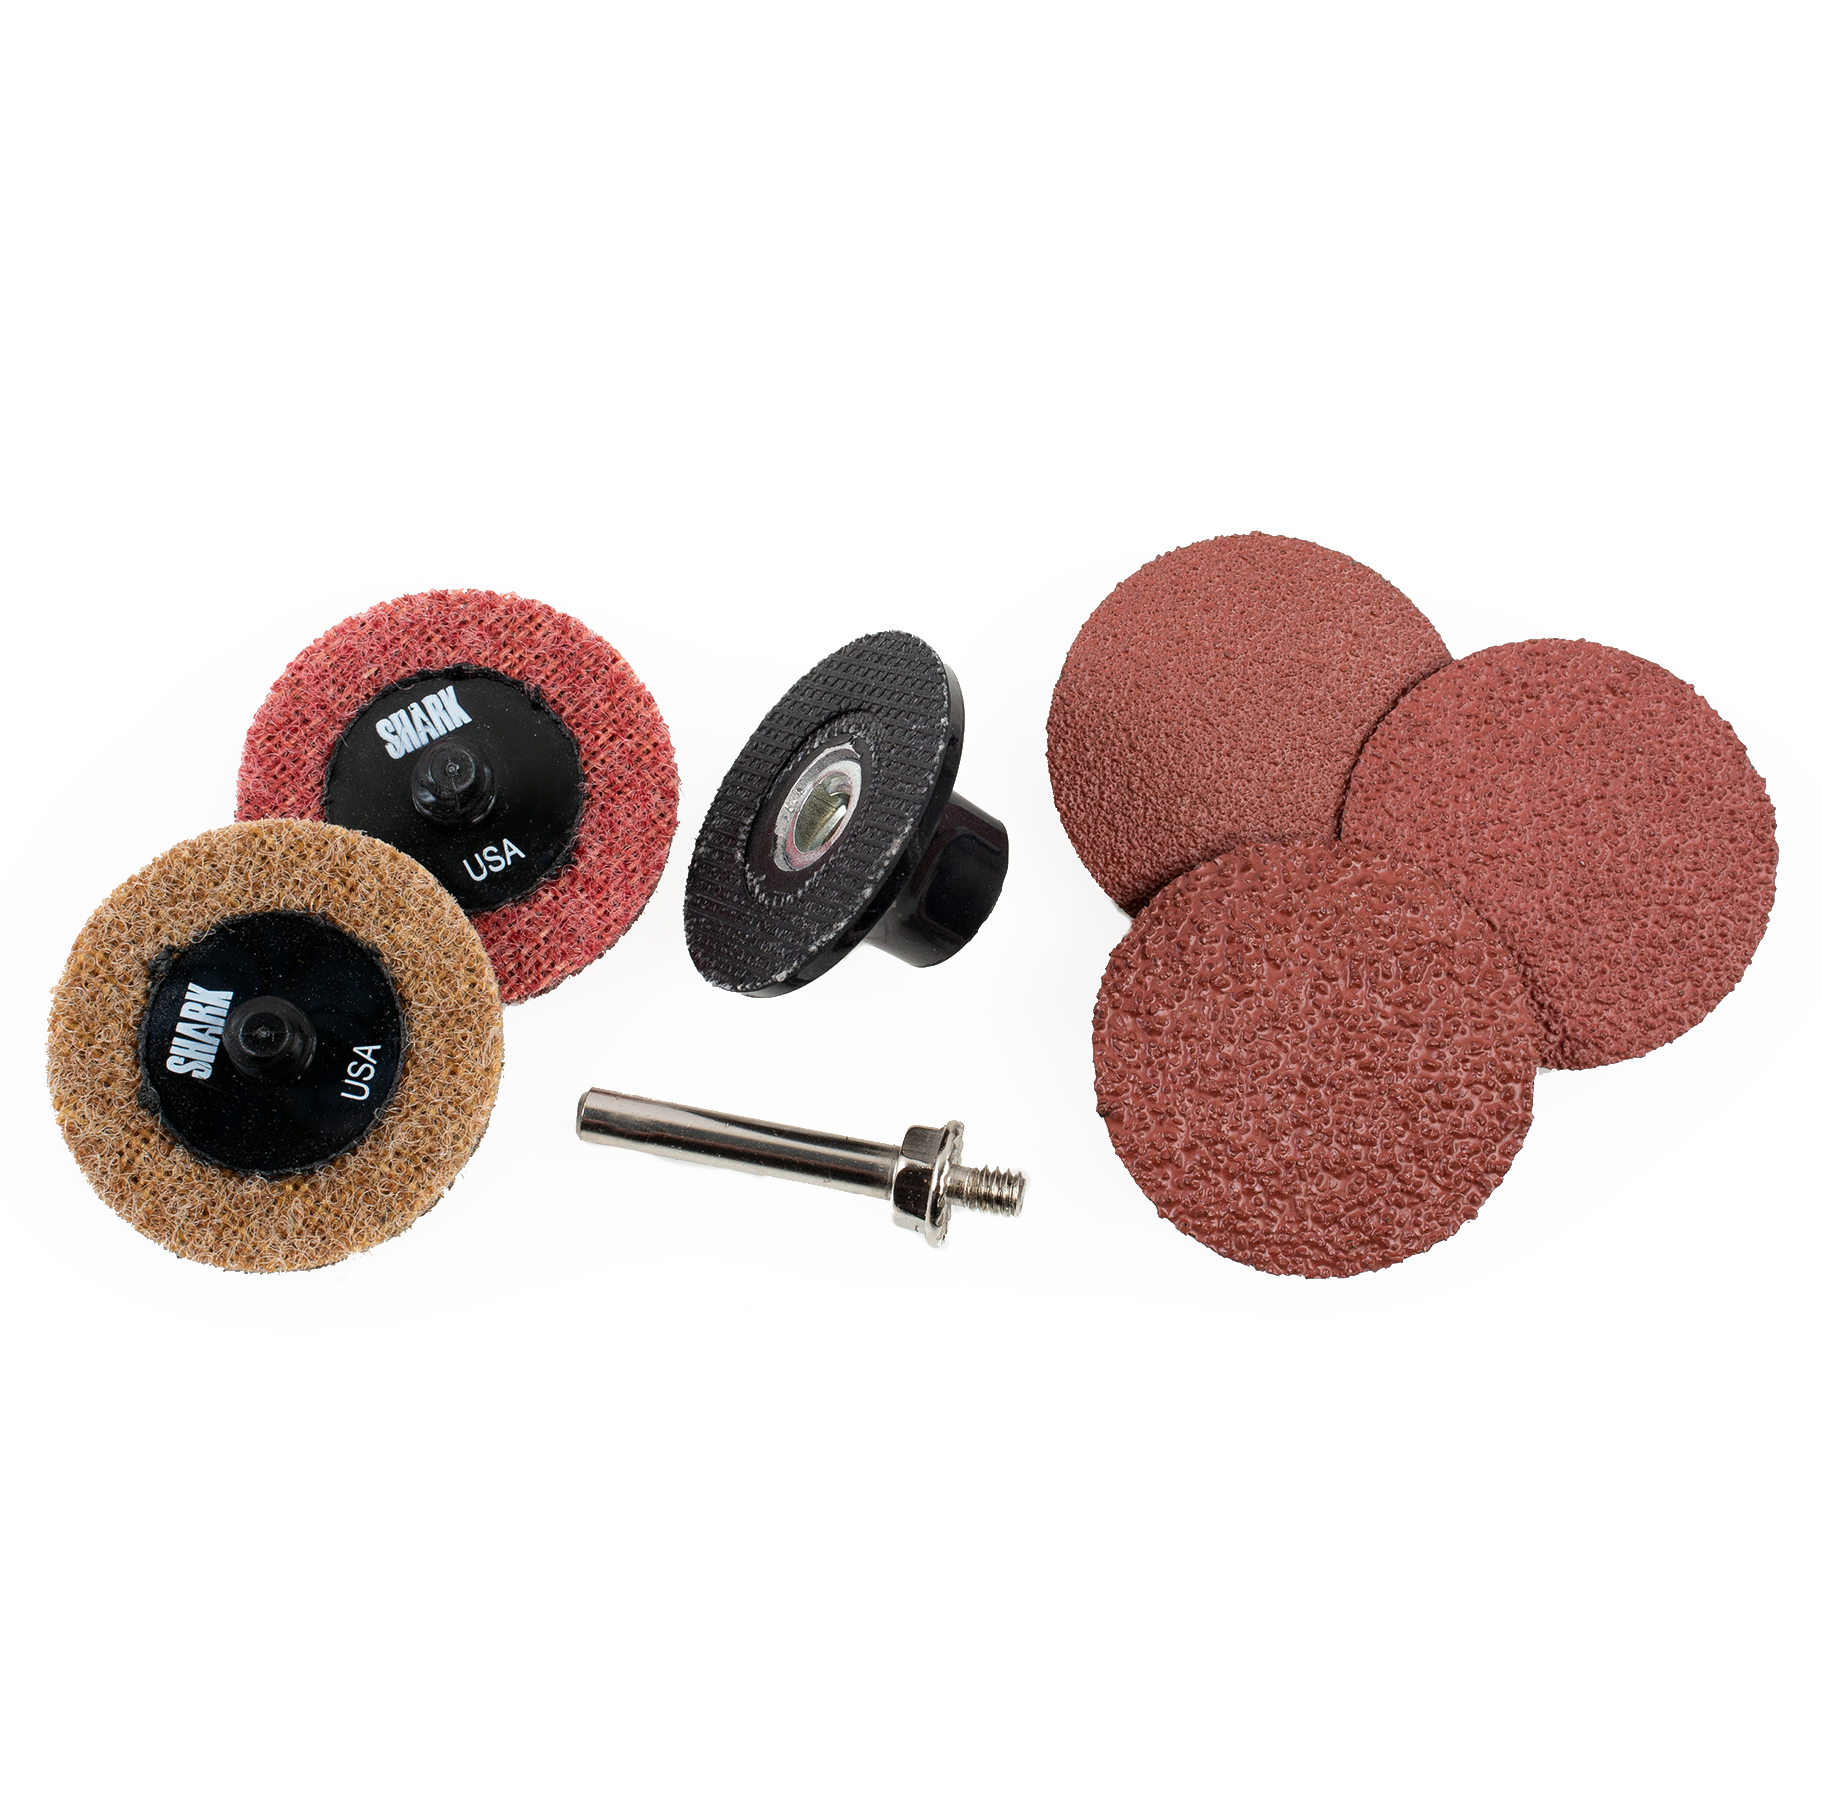 SHARK 6 PC. Grinding Kit  2″ Mini Grinding & Surface Conditioning 1